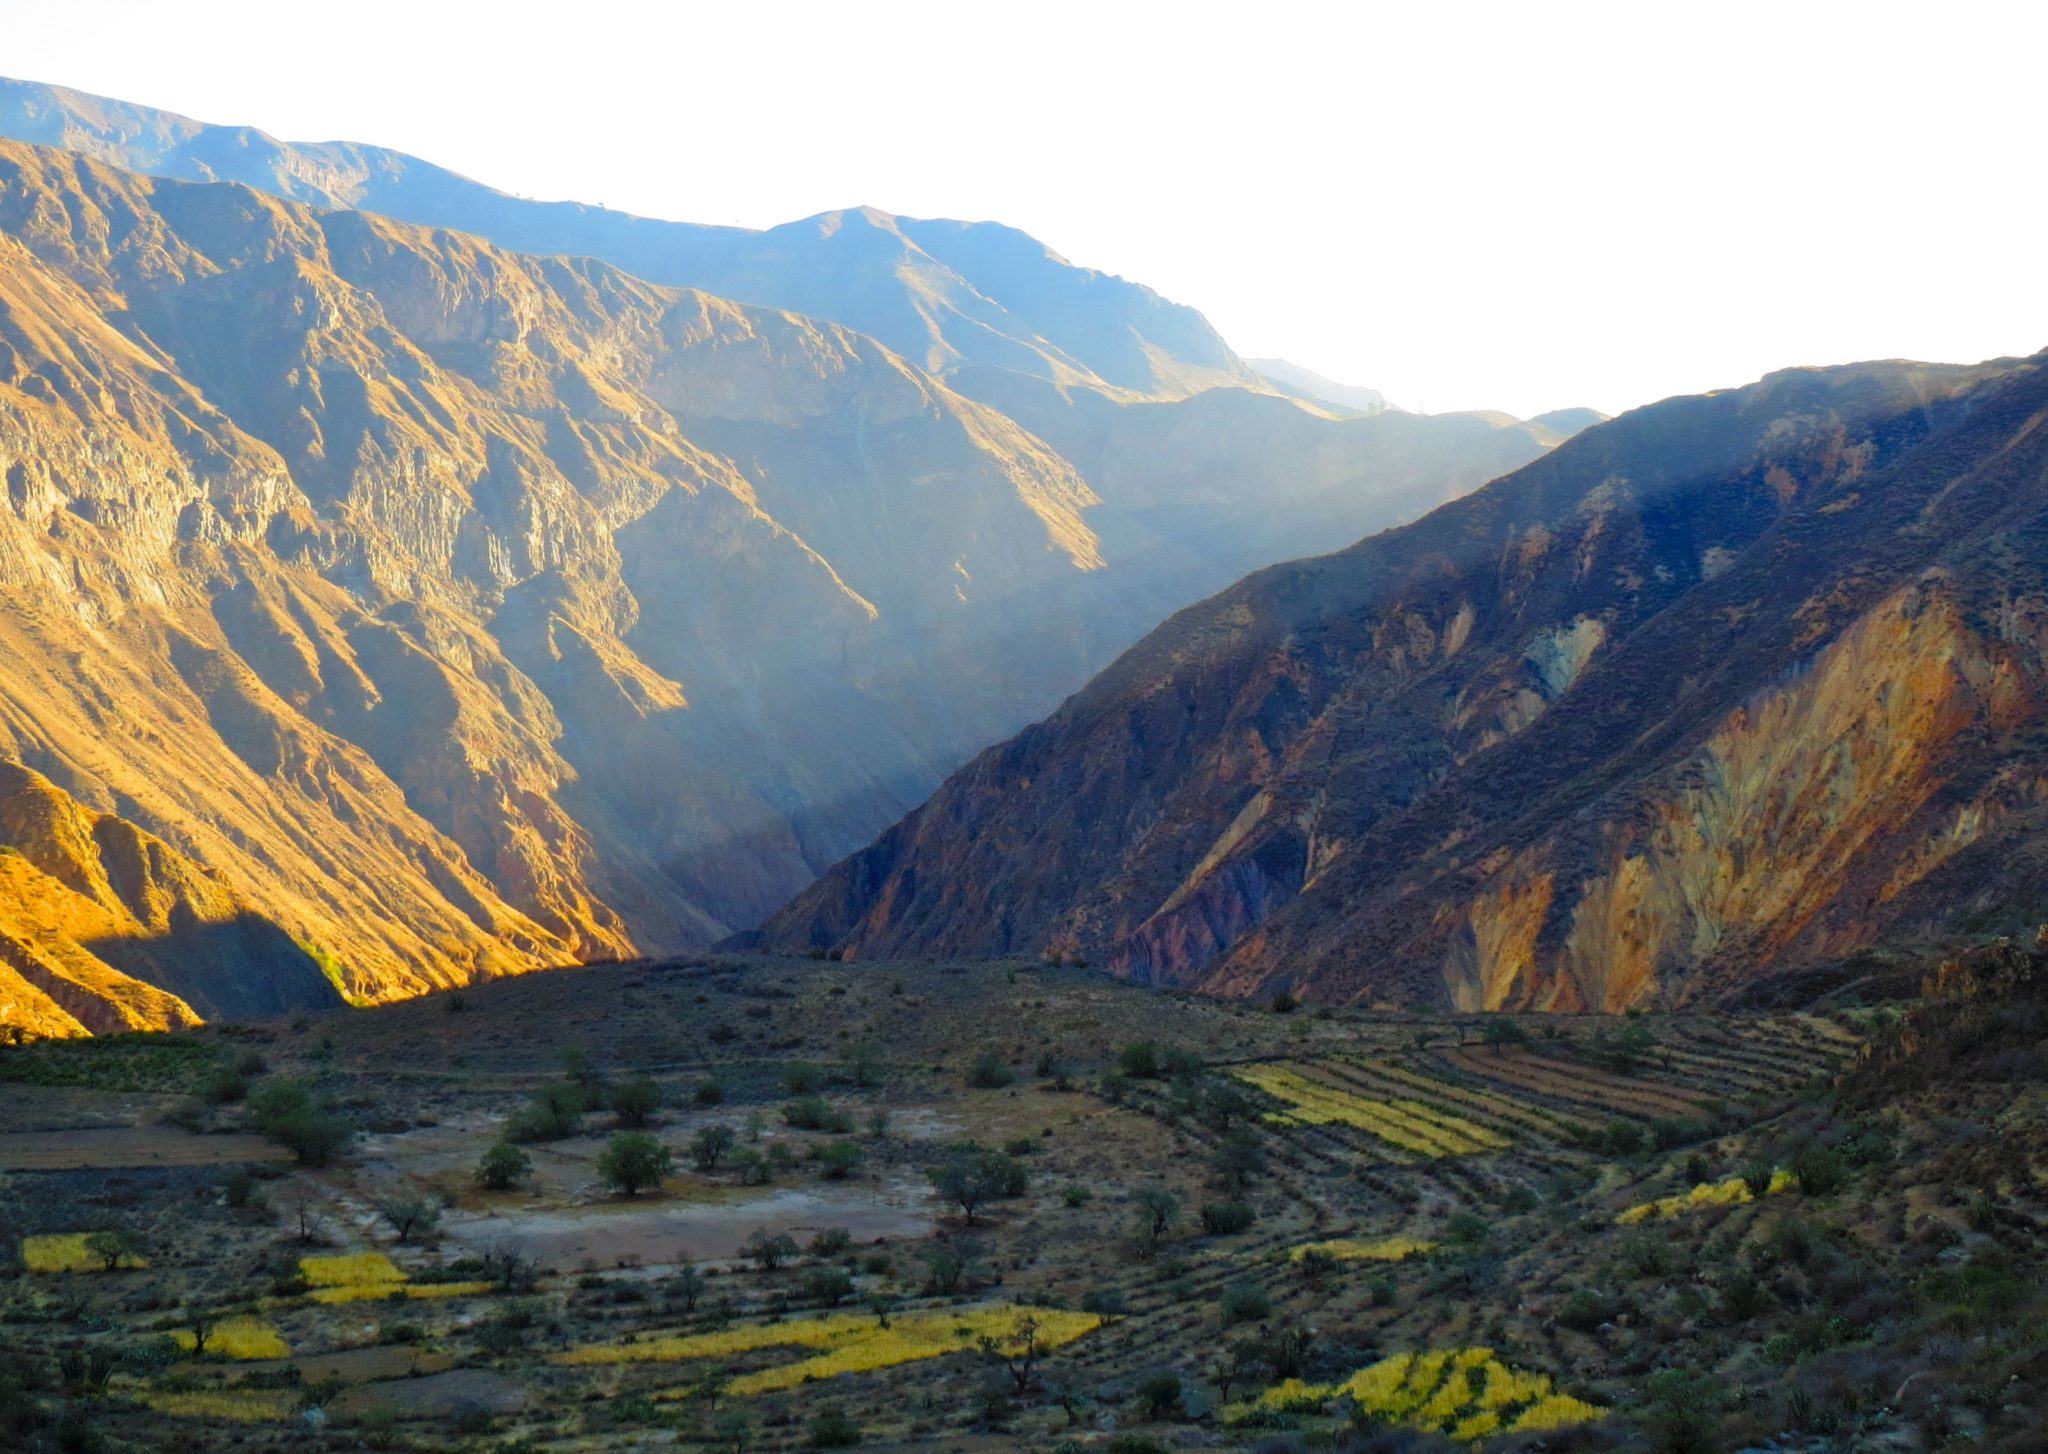 One of the best hikes I've ever made happened at Colca Canyon